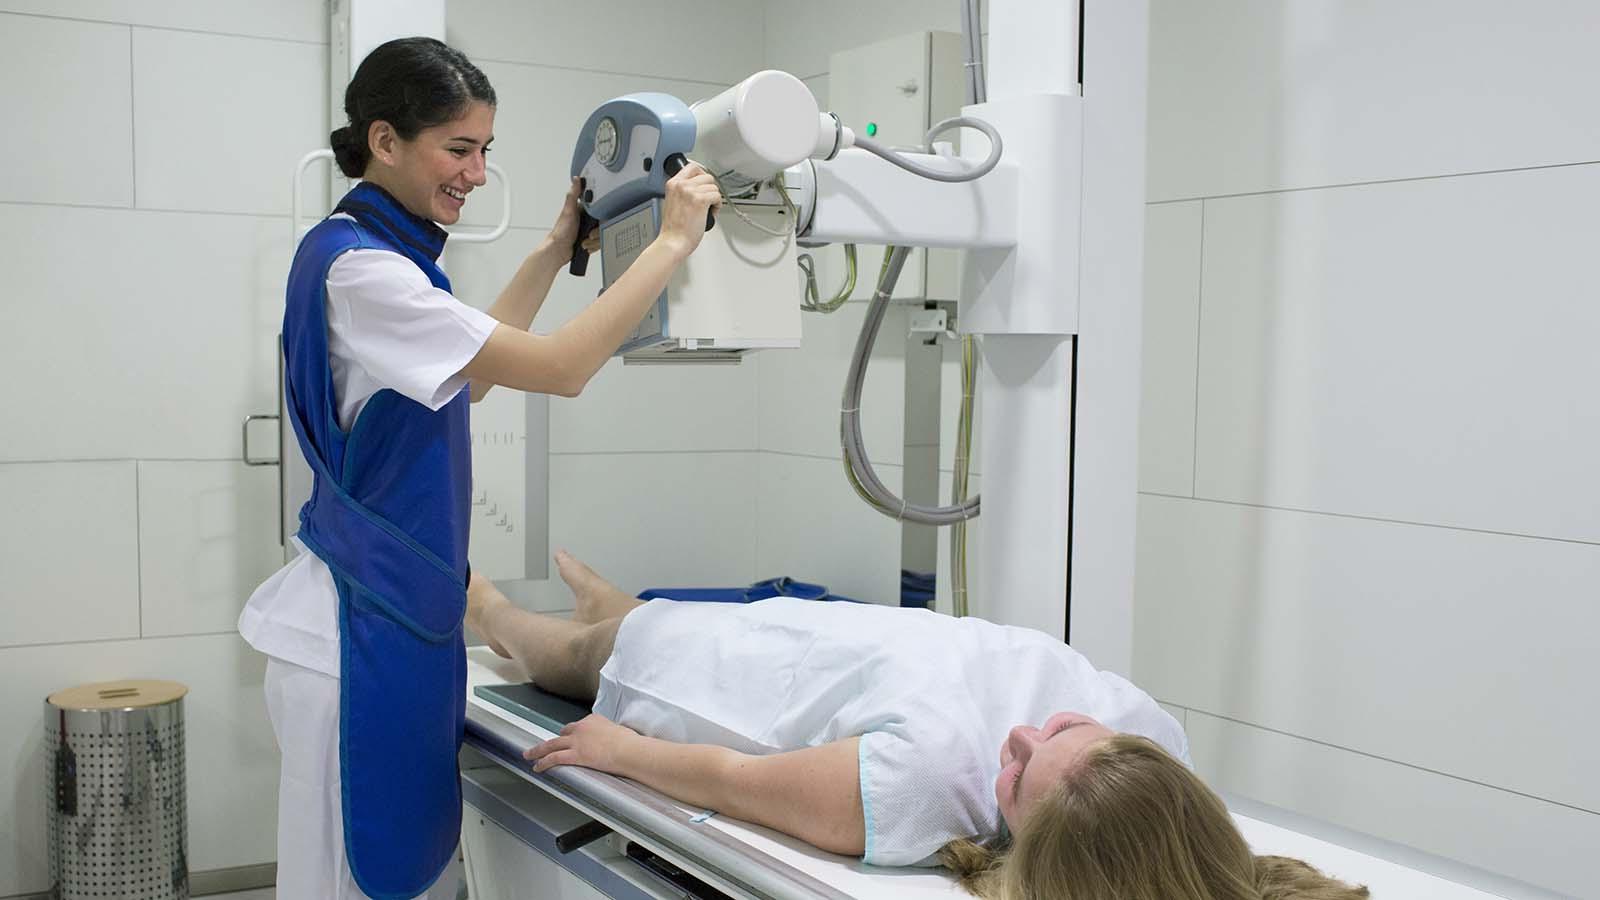 Radiologist with patient preparing machine for x-ray